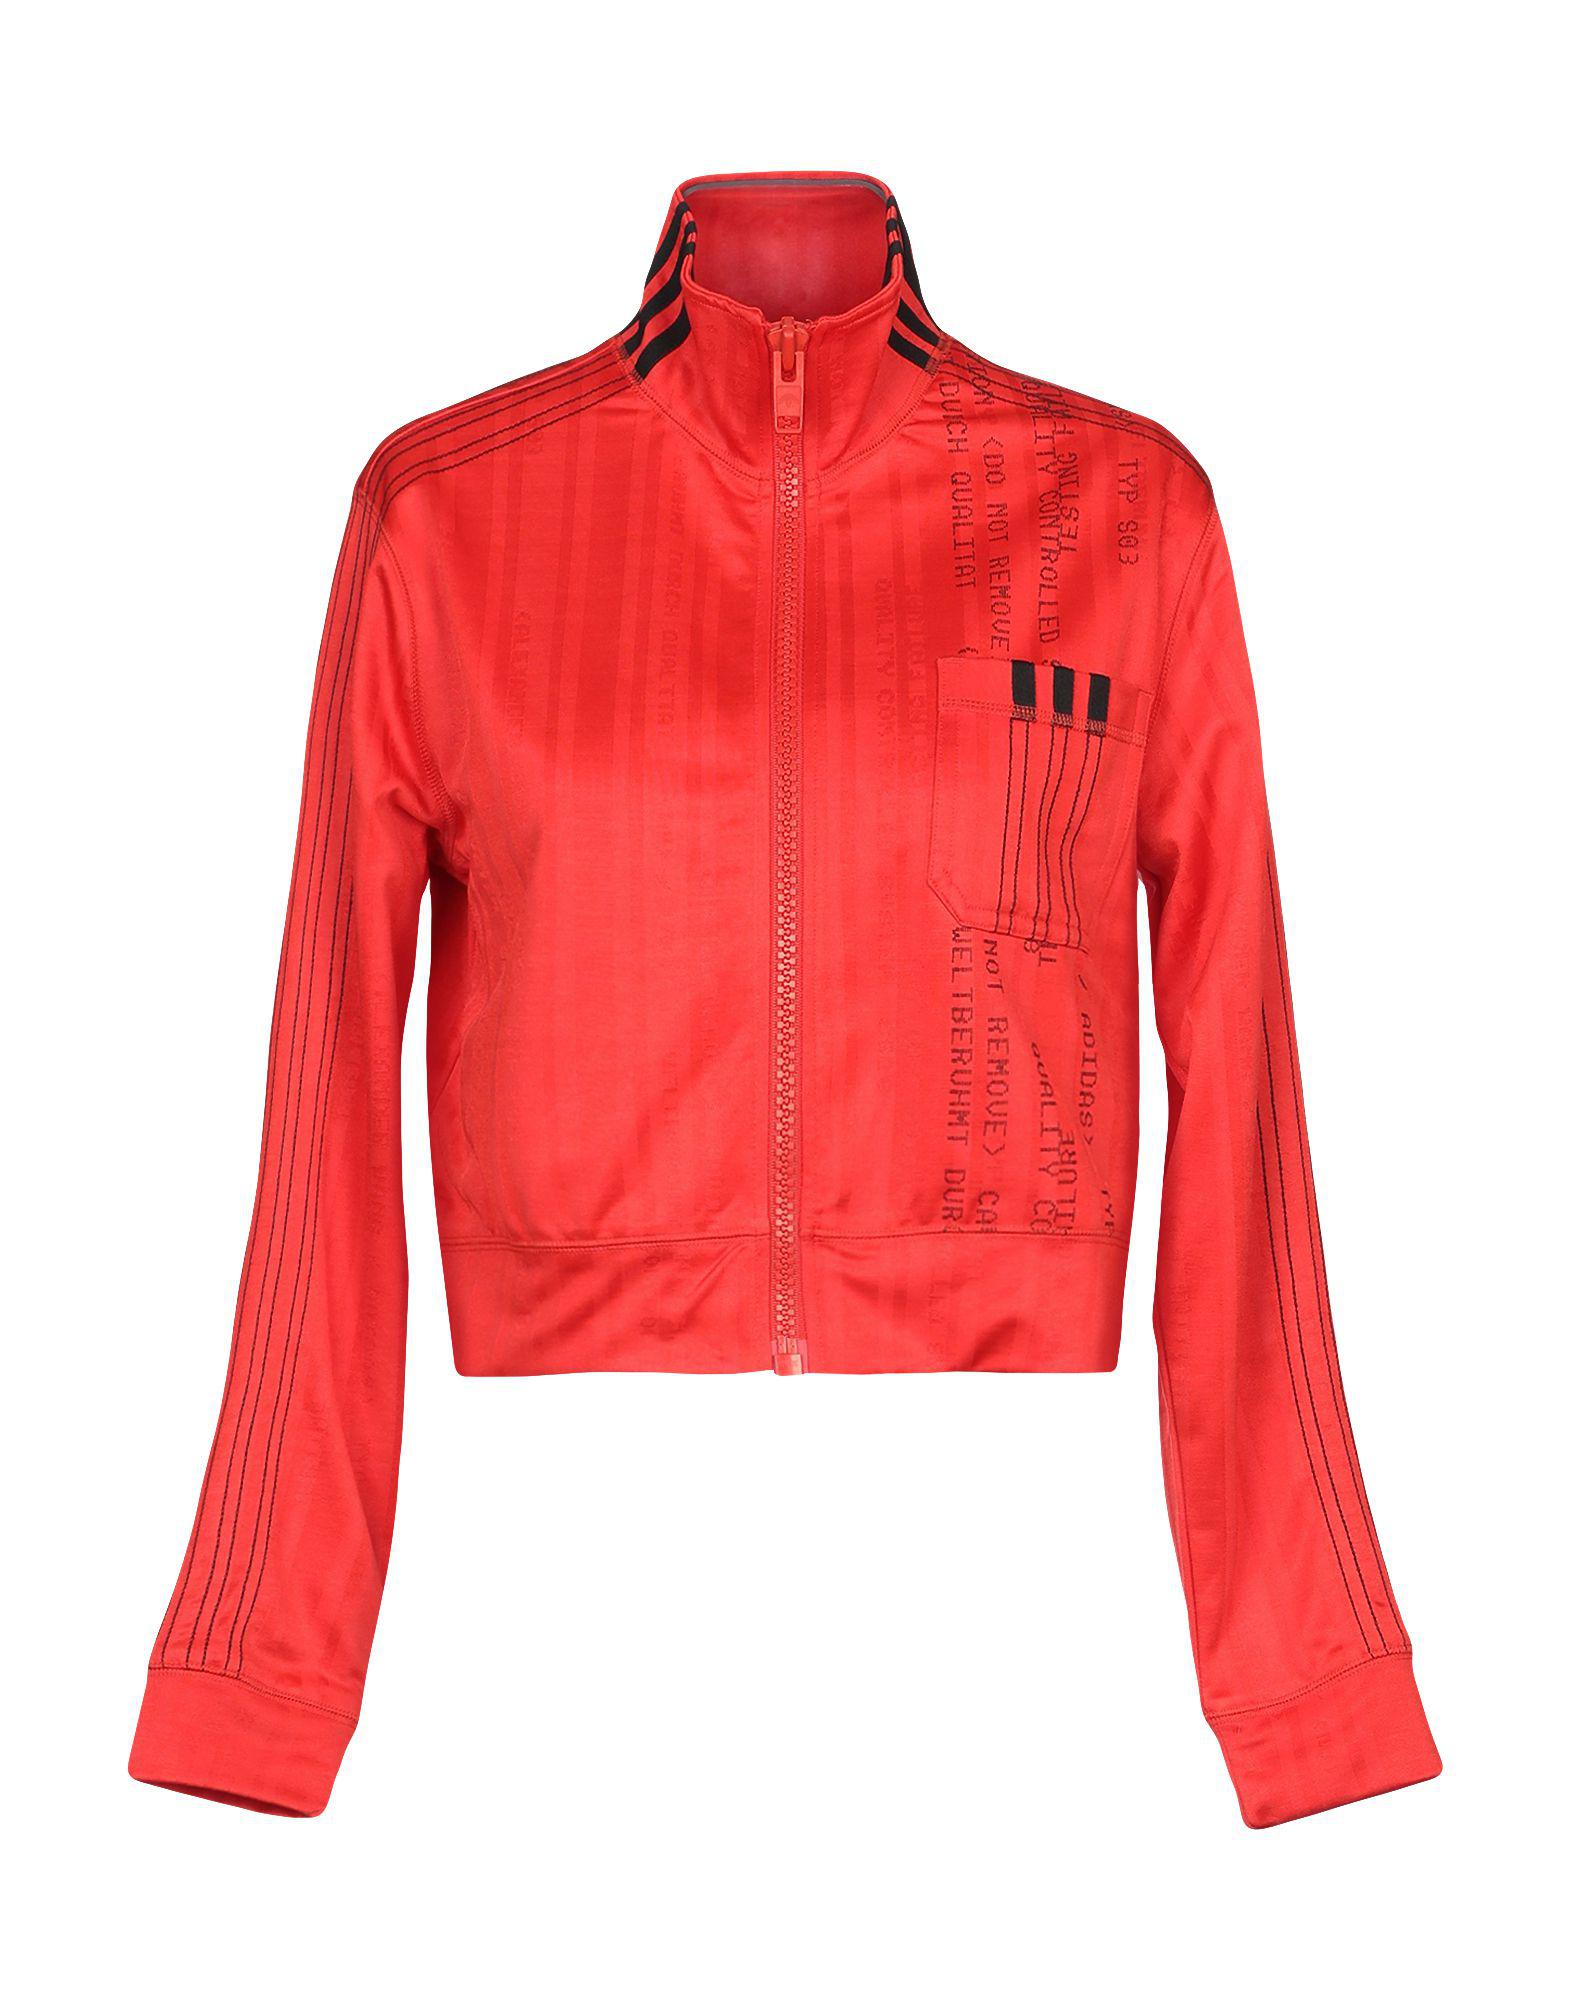 adidas Synthetic Jacket in Red - Lyst